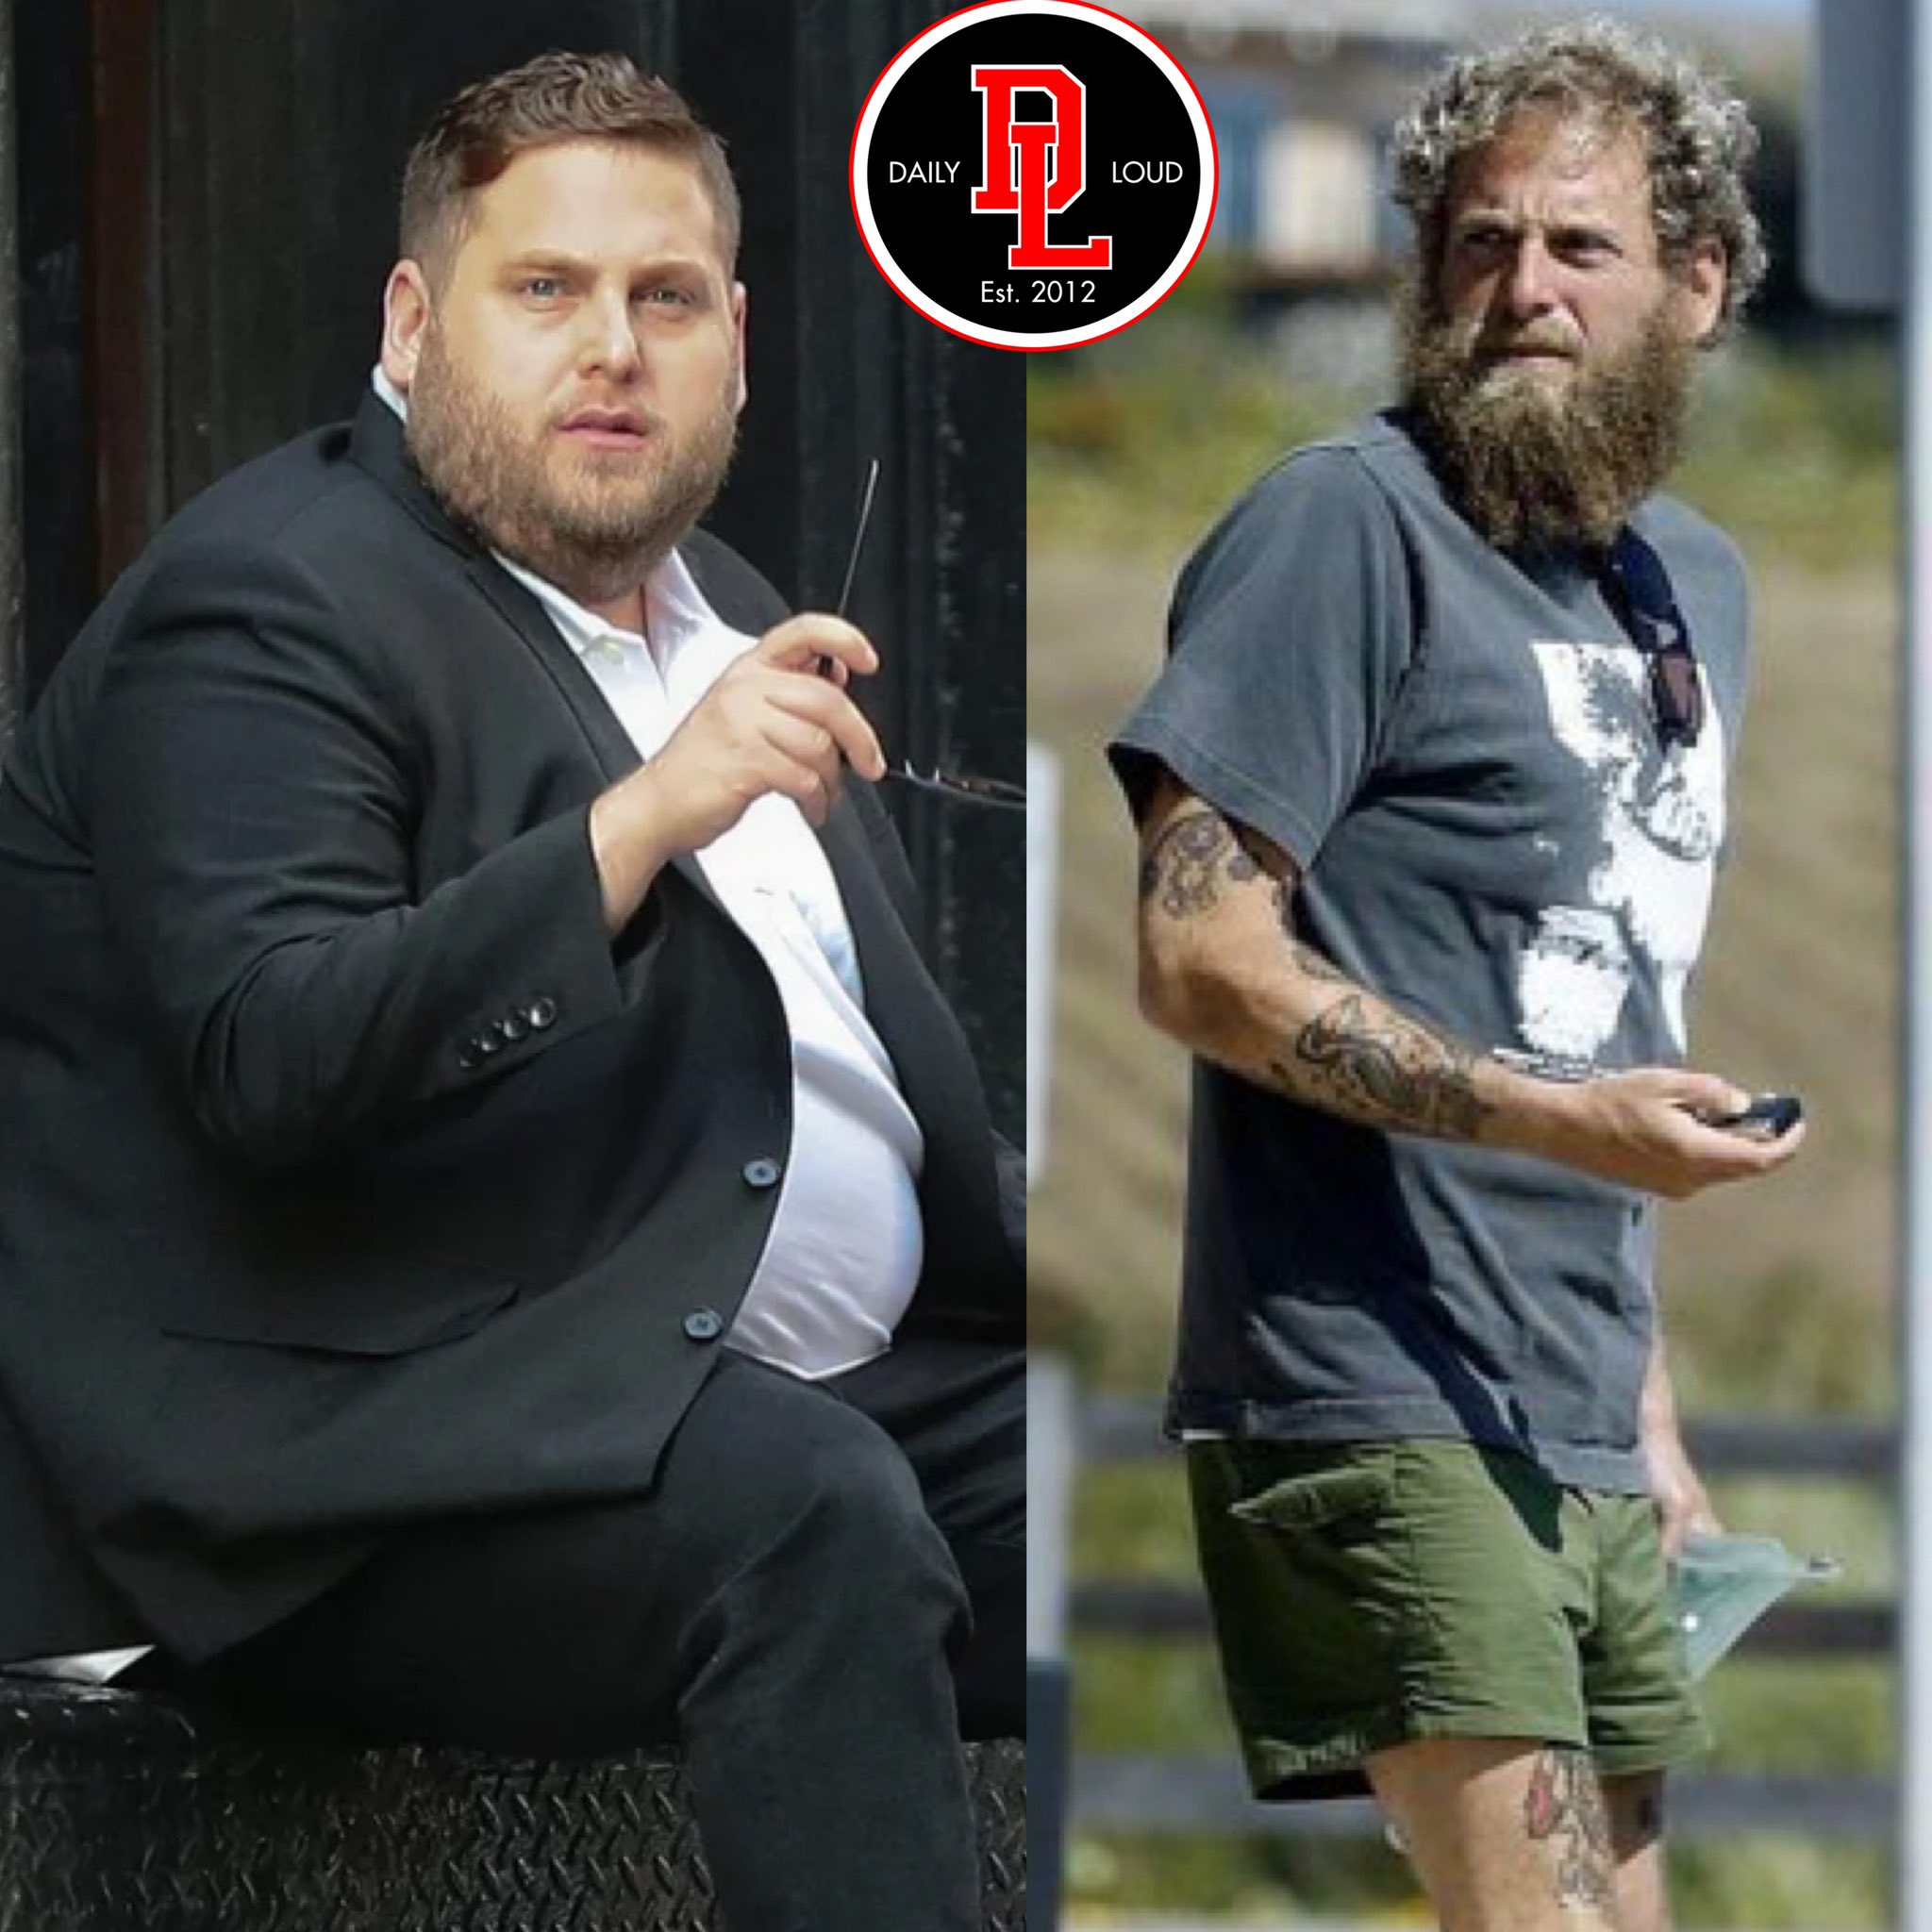 Daily Loud on X: Actor Jonah Hill's weight transformation makes